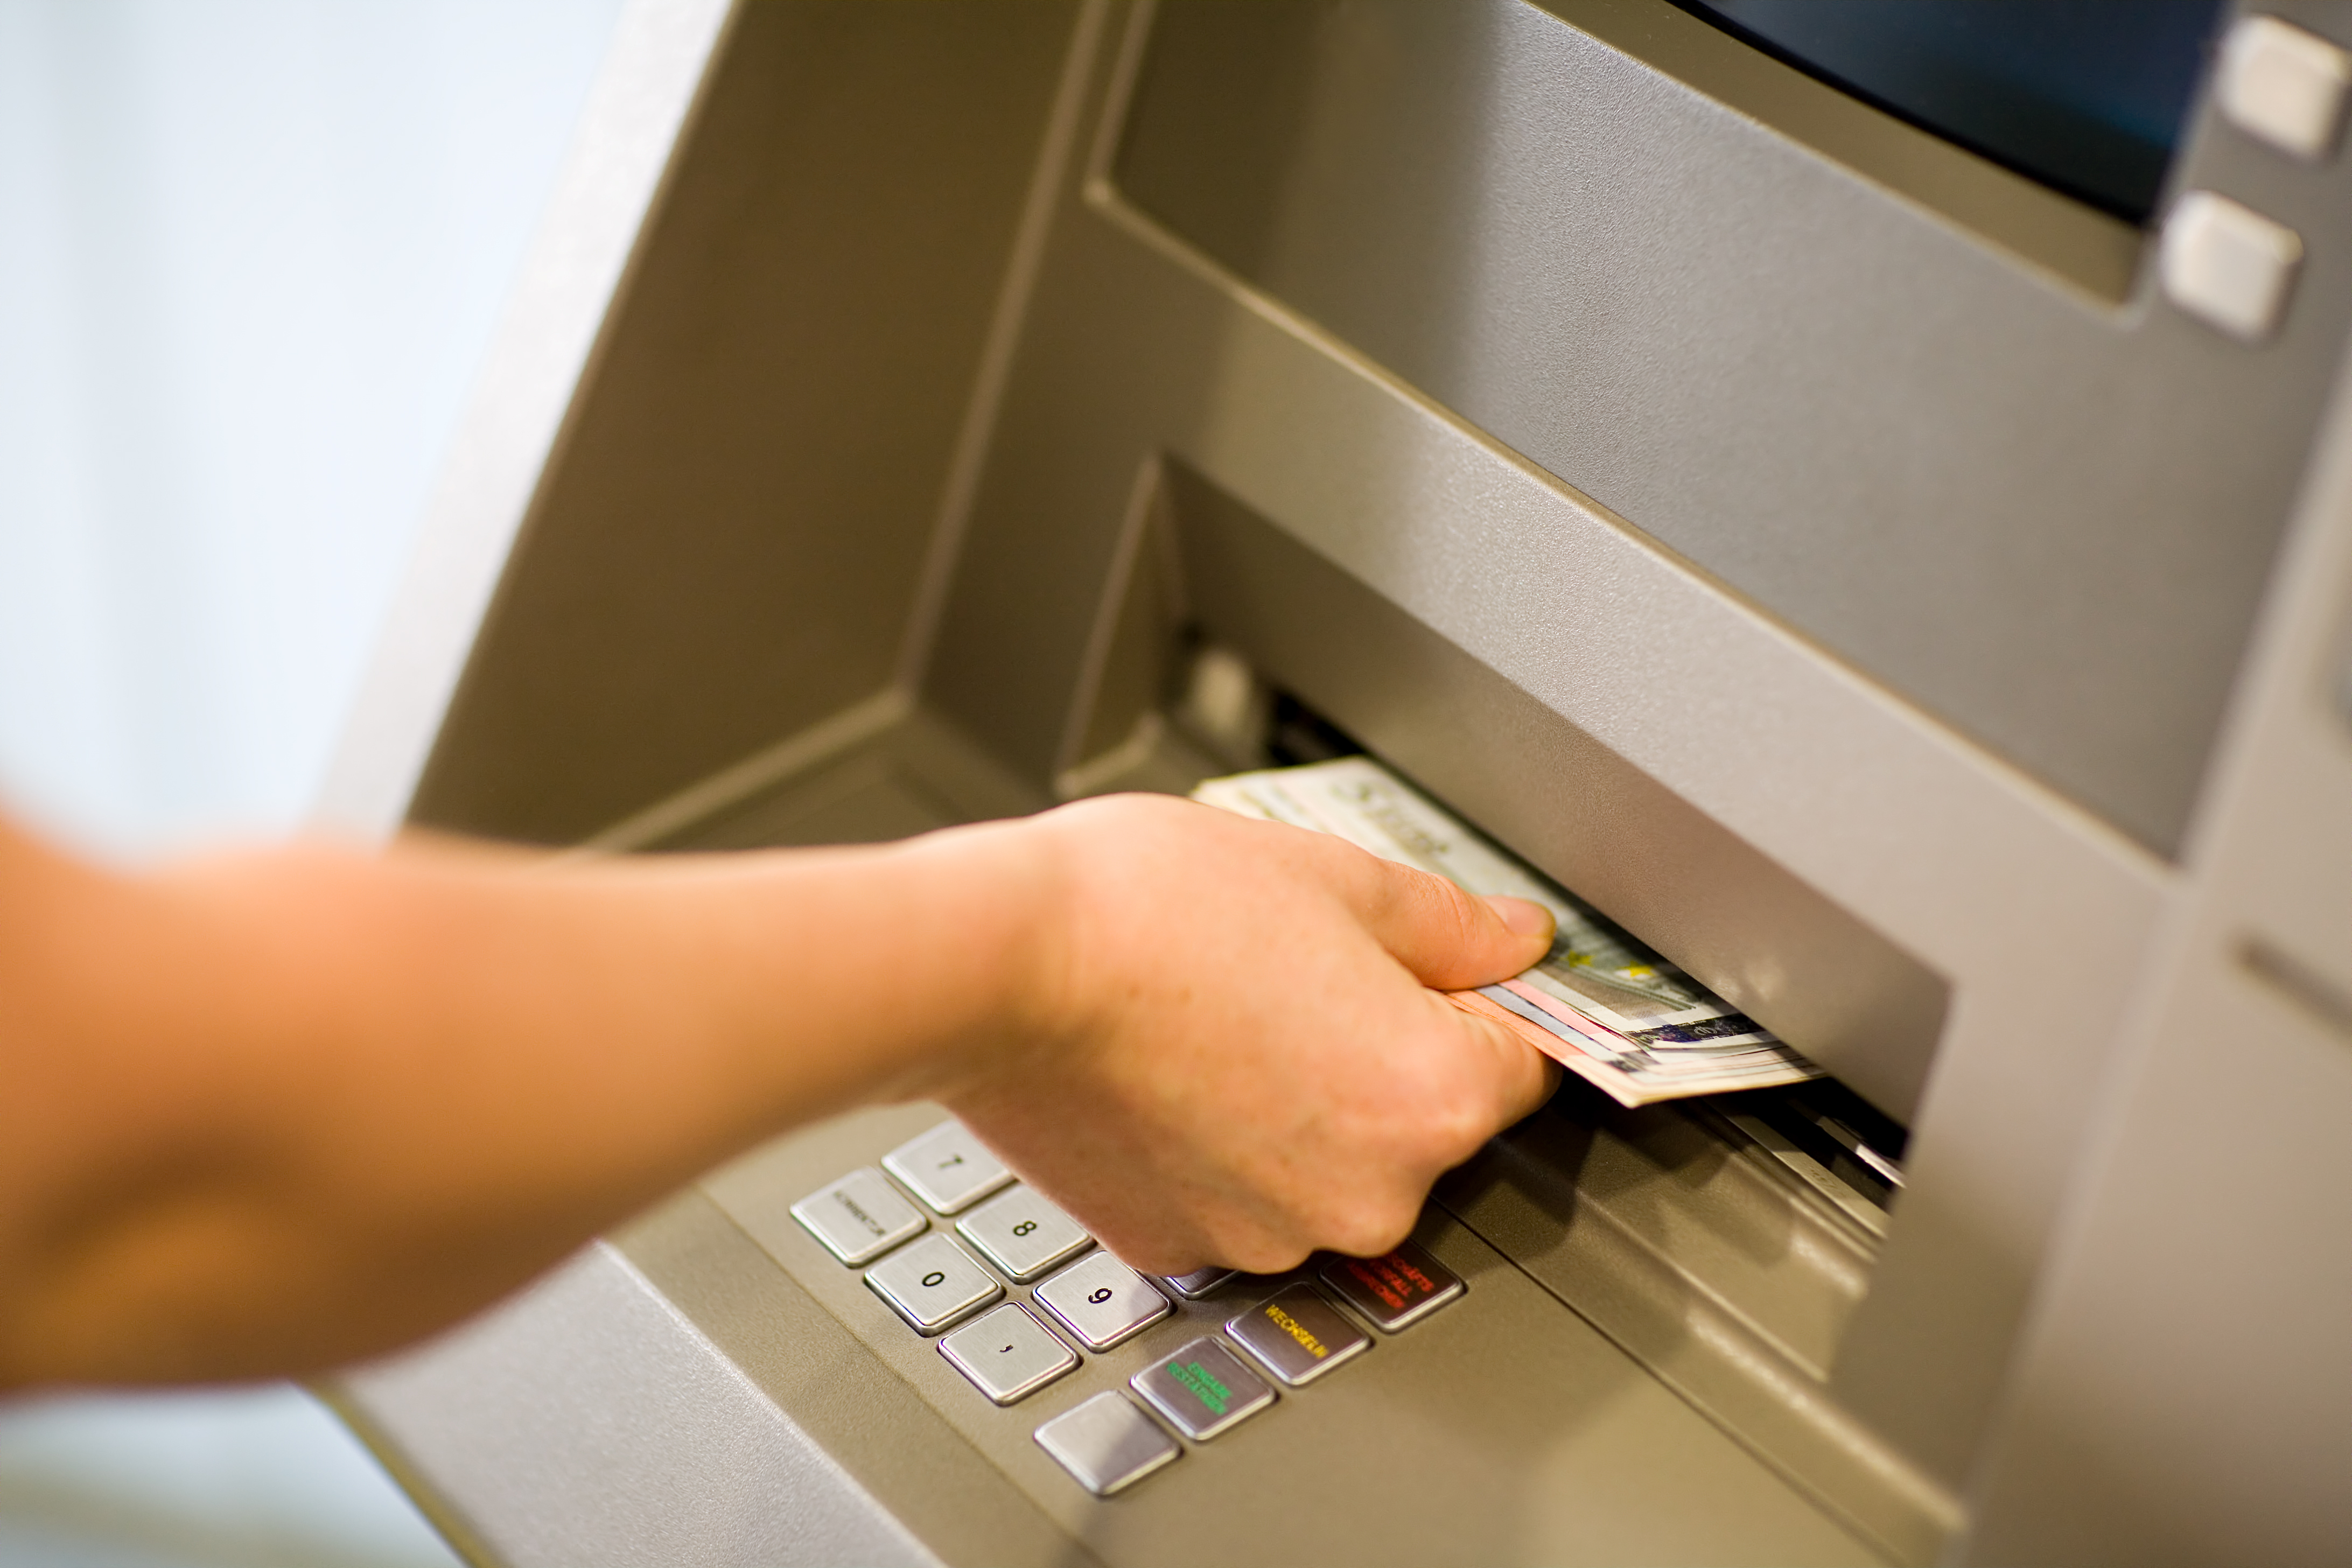 A person collecting money from an ATM. | Source: Shutterstock